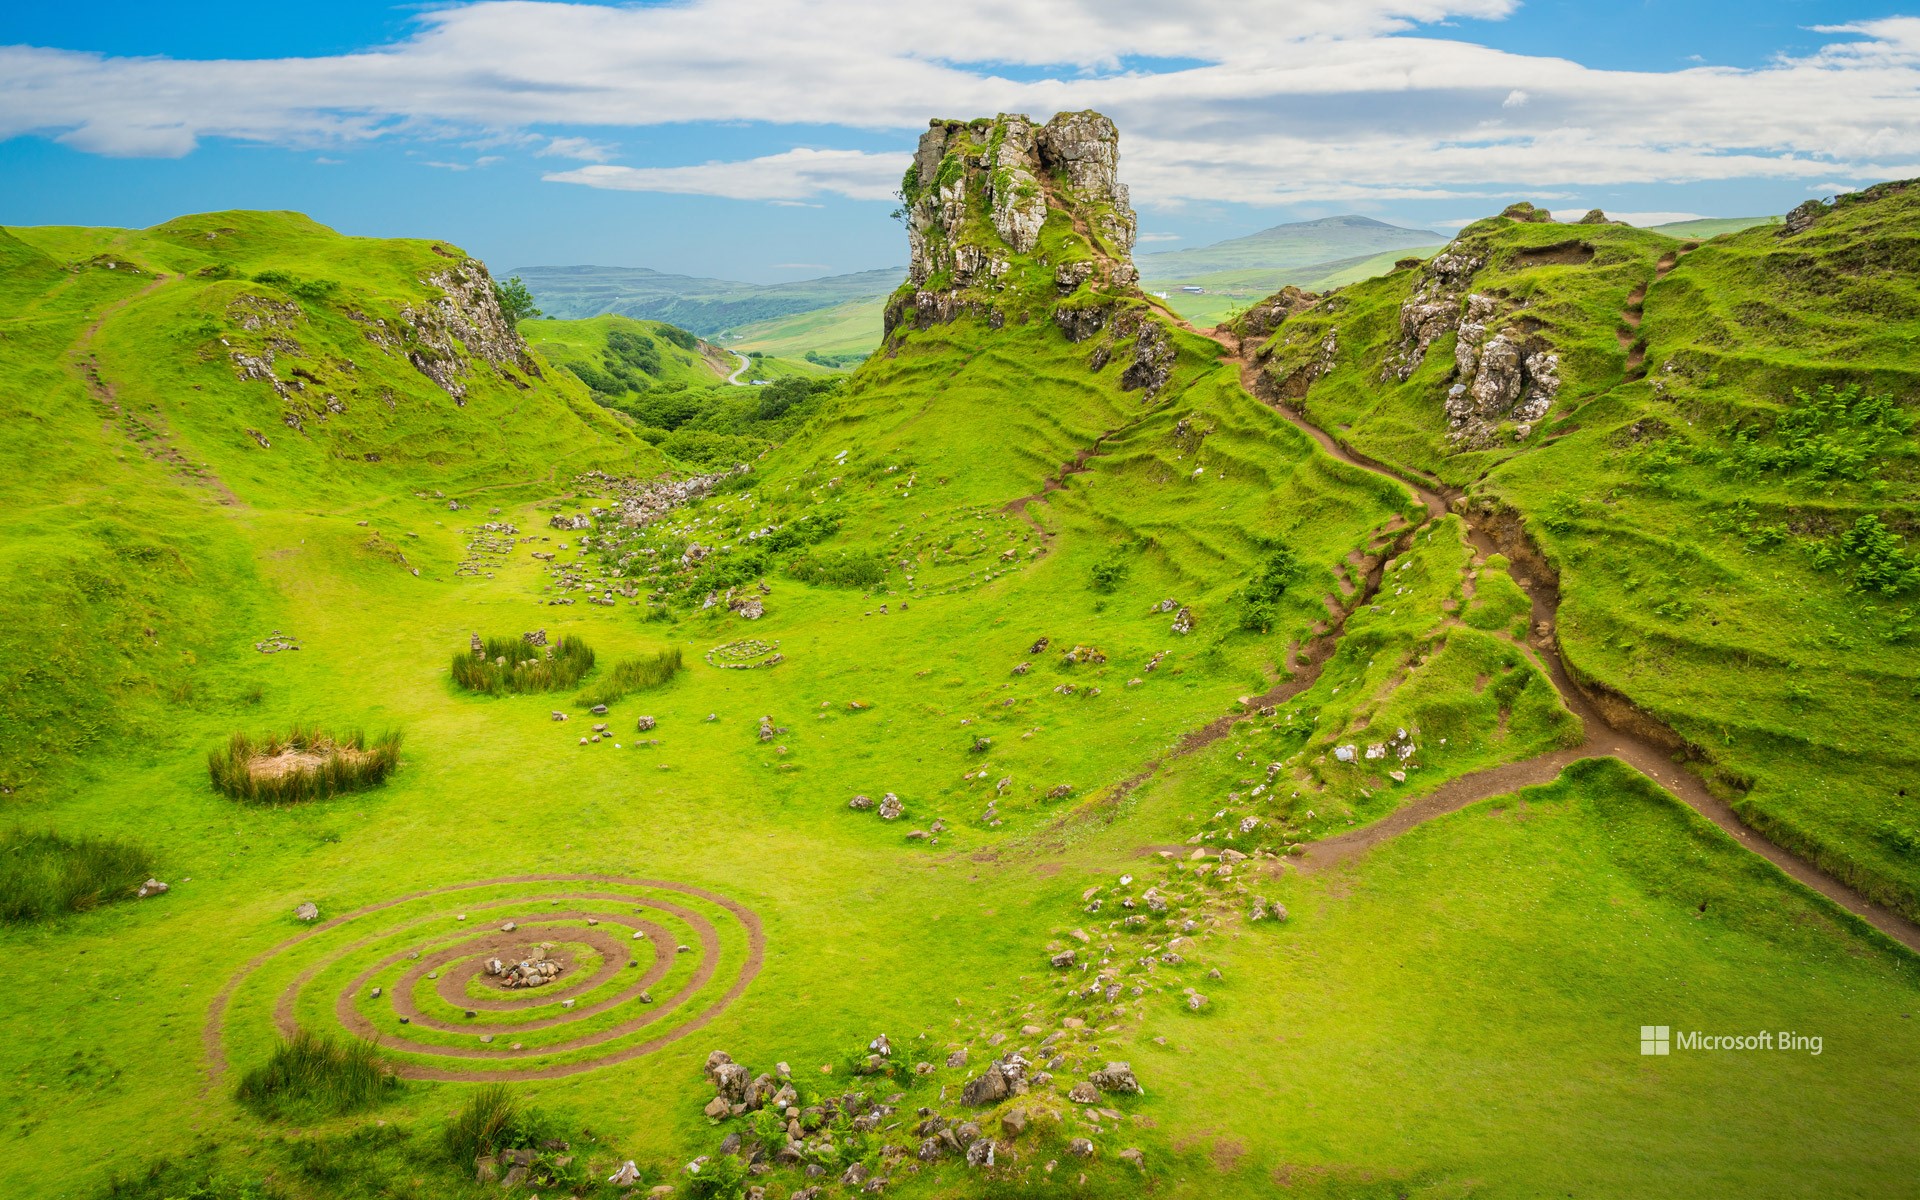 The Fairy Glen, in the hills above the village of Uig on the Isle of Skye